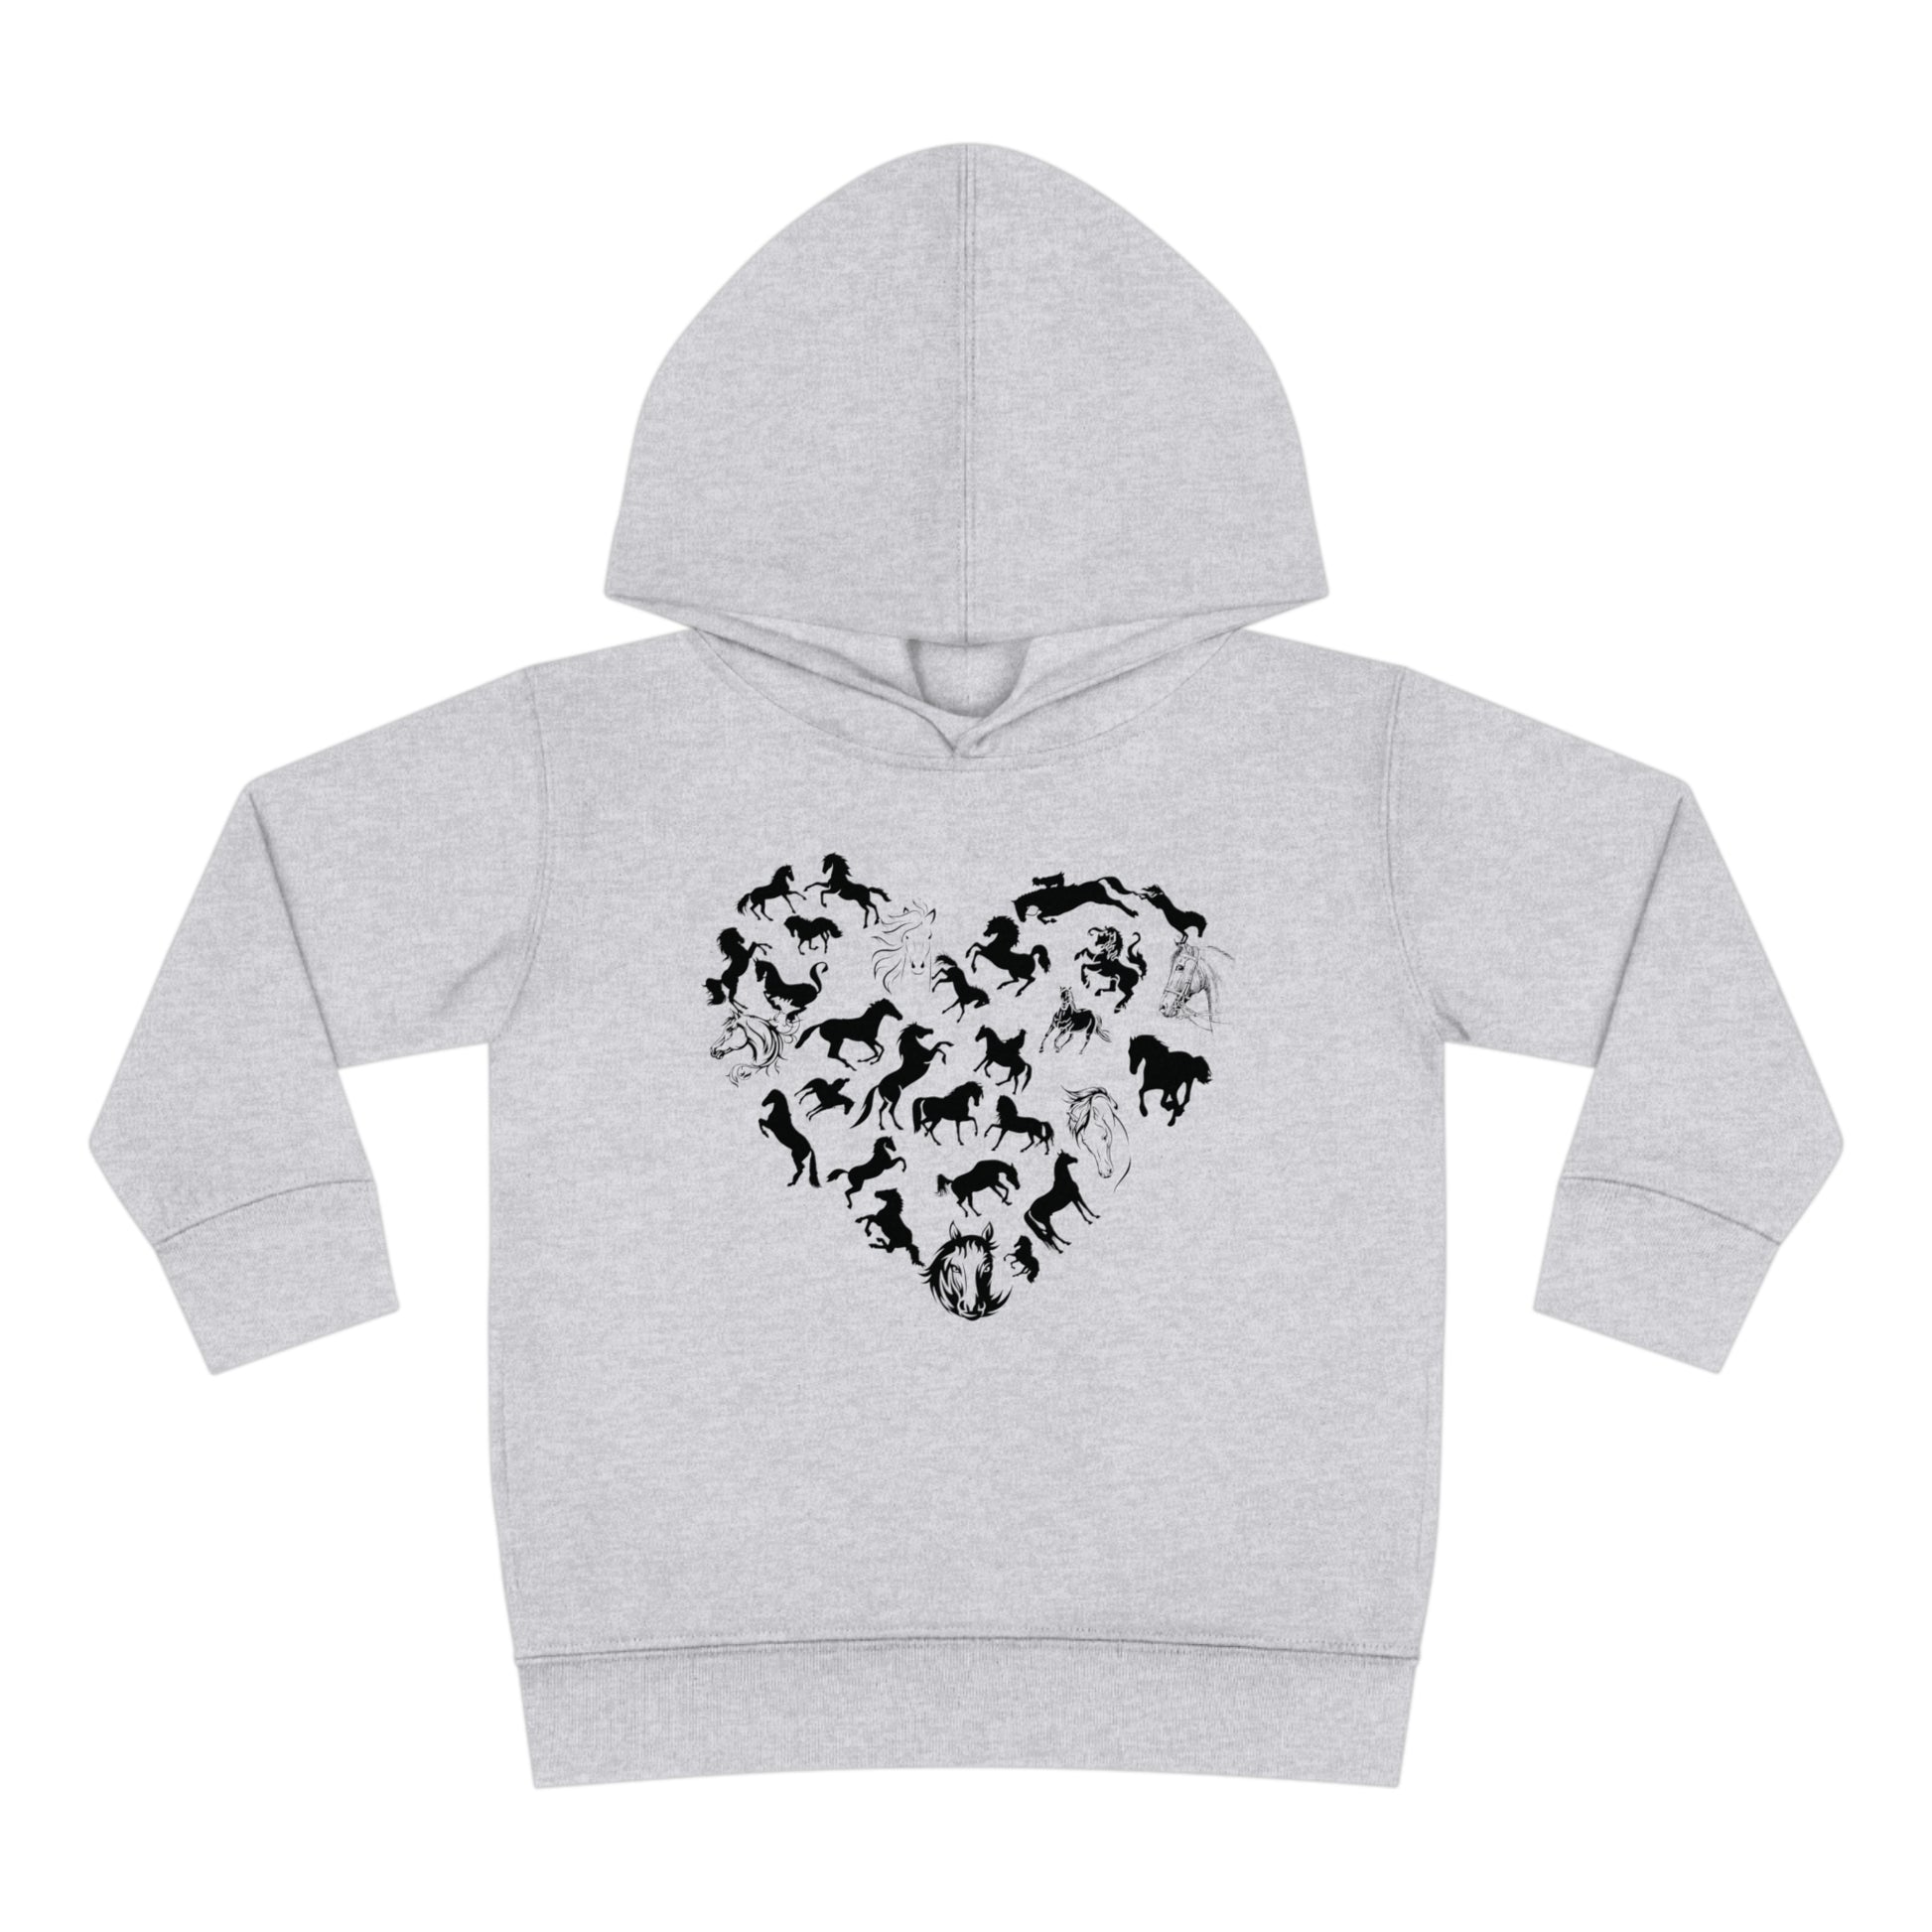 Horse Heart Hoodie | Horse Lover Tee - Horses Heart Toddler - Horse Lover Gift - Horse Toddler Shirt - Equestrian Tee - Gift for Horse Owner Kids clothes Heather 2T 